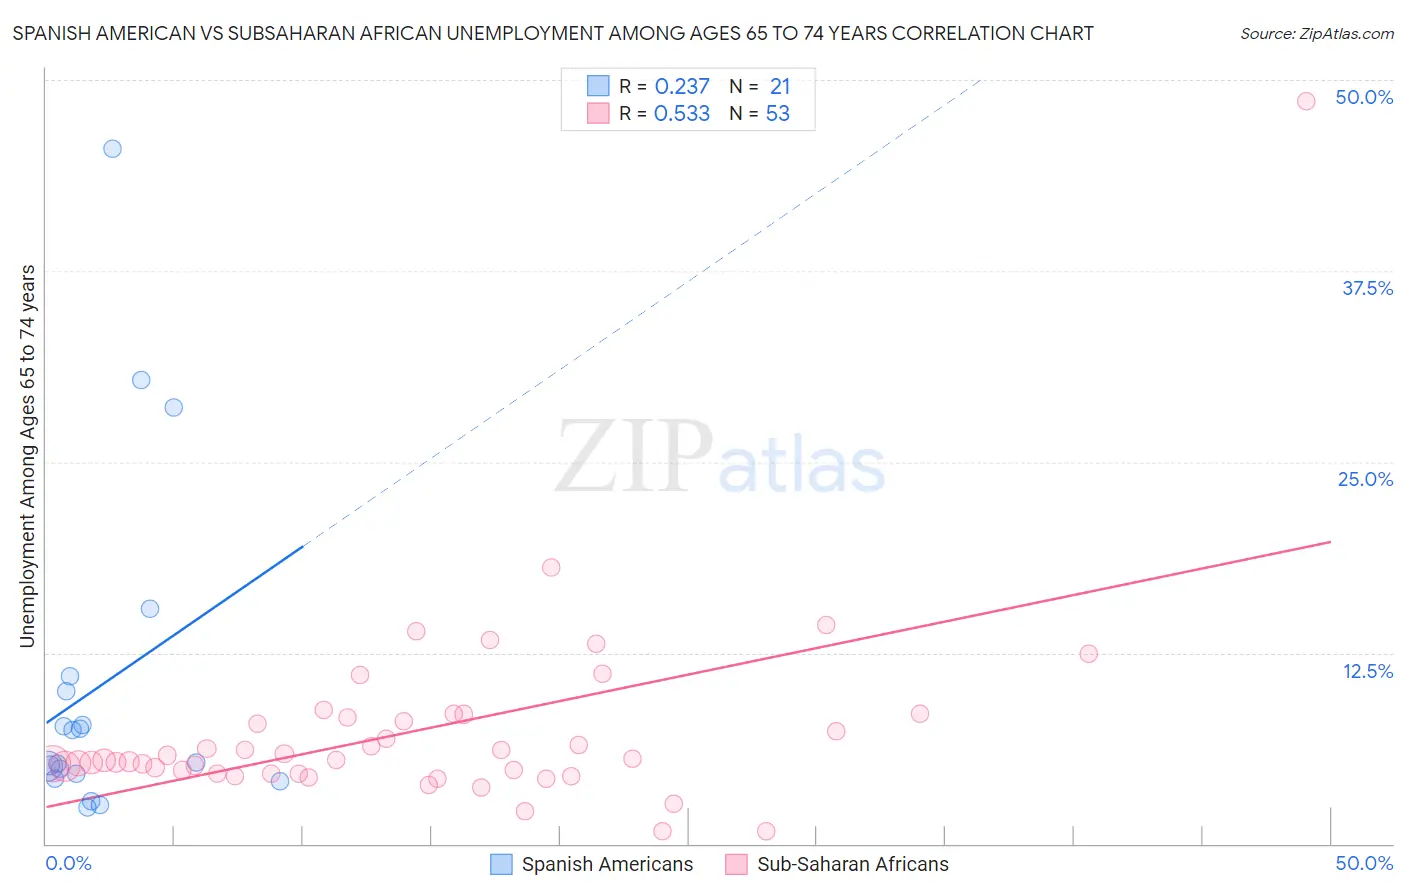 Spanish American vs Subsaharan African Unemployment Among Ages 65 to 74 years